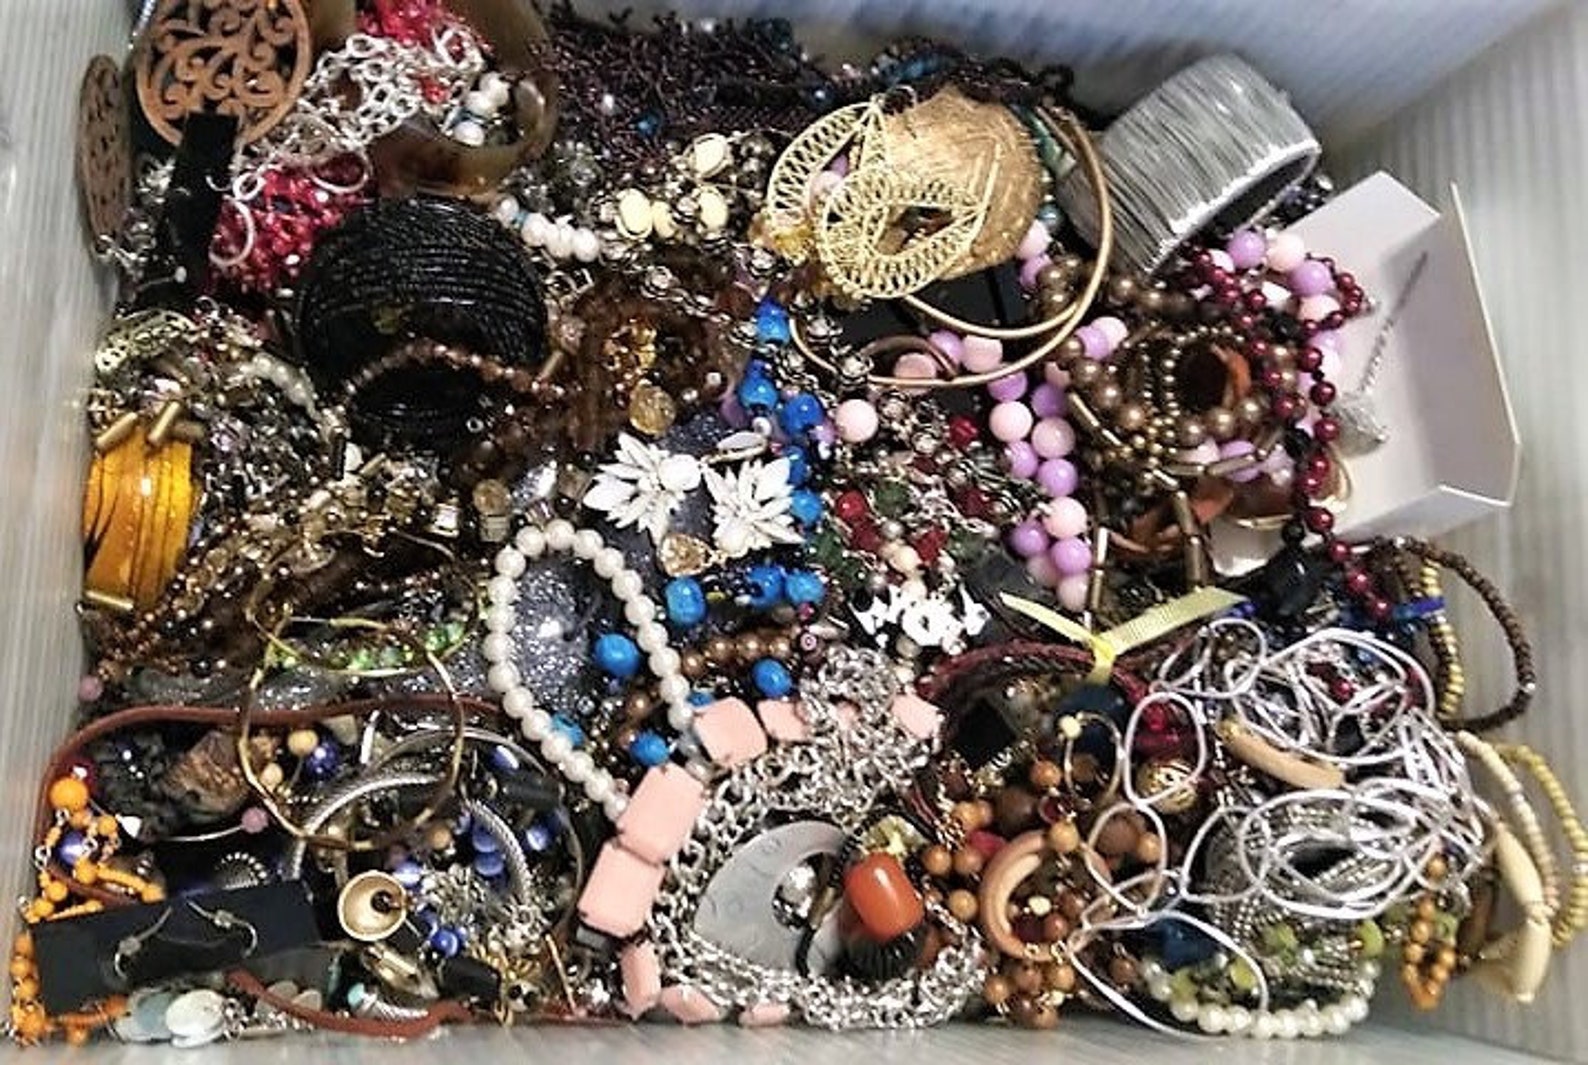 7 Pound FULL Junk Jewelry Lot Craft Pieces and Parts Trend | Etsy